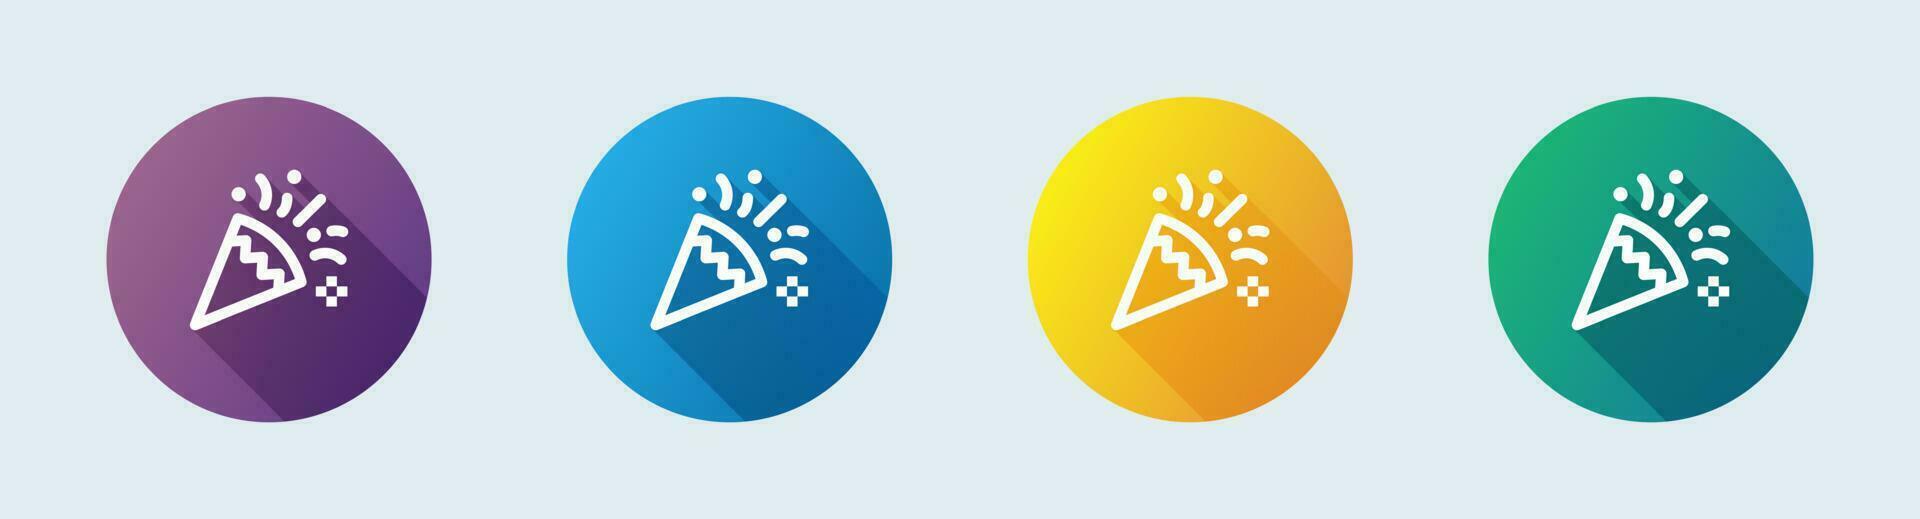 Party line icon in flat design style. Event signs vector illustration.